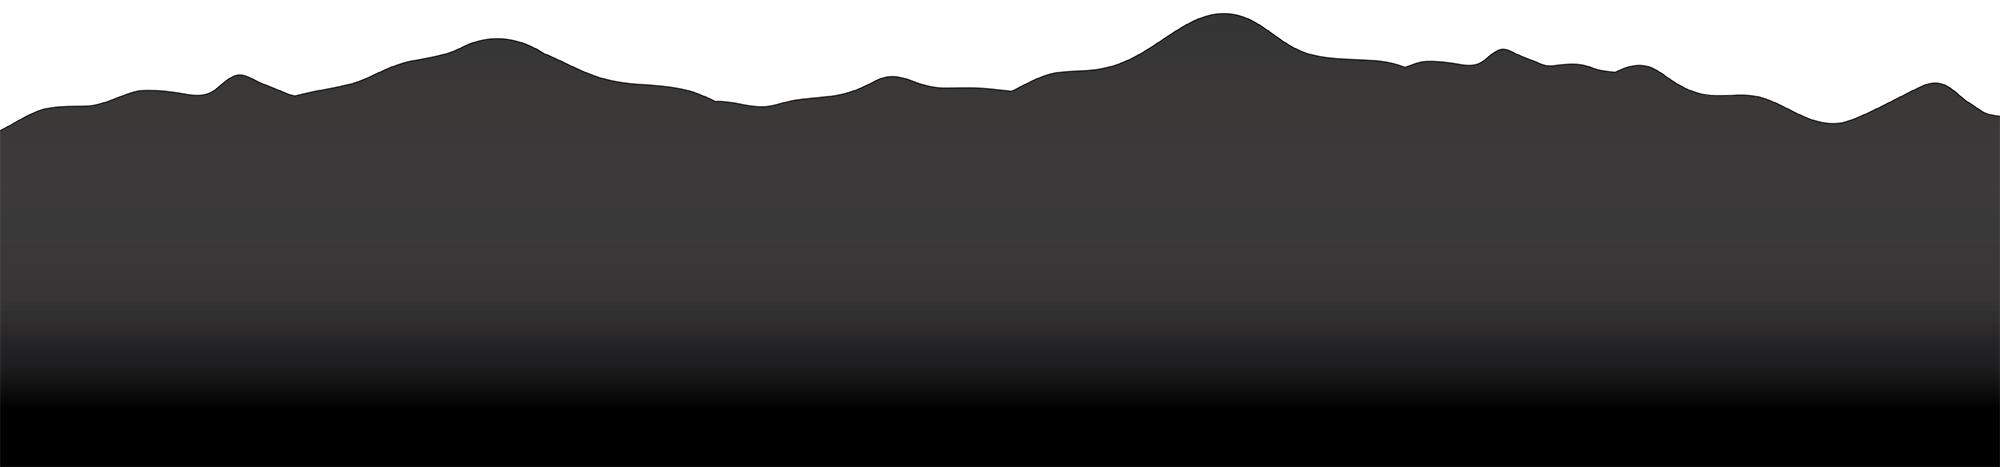 Footer Background - a silhouette of hills